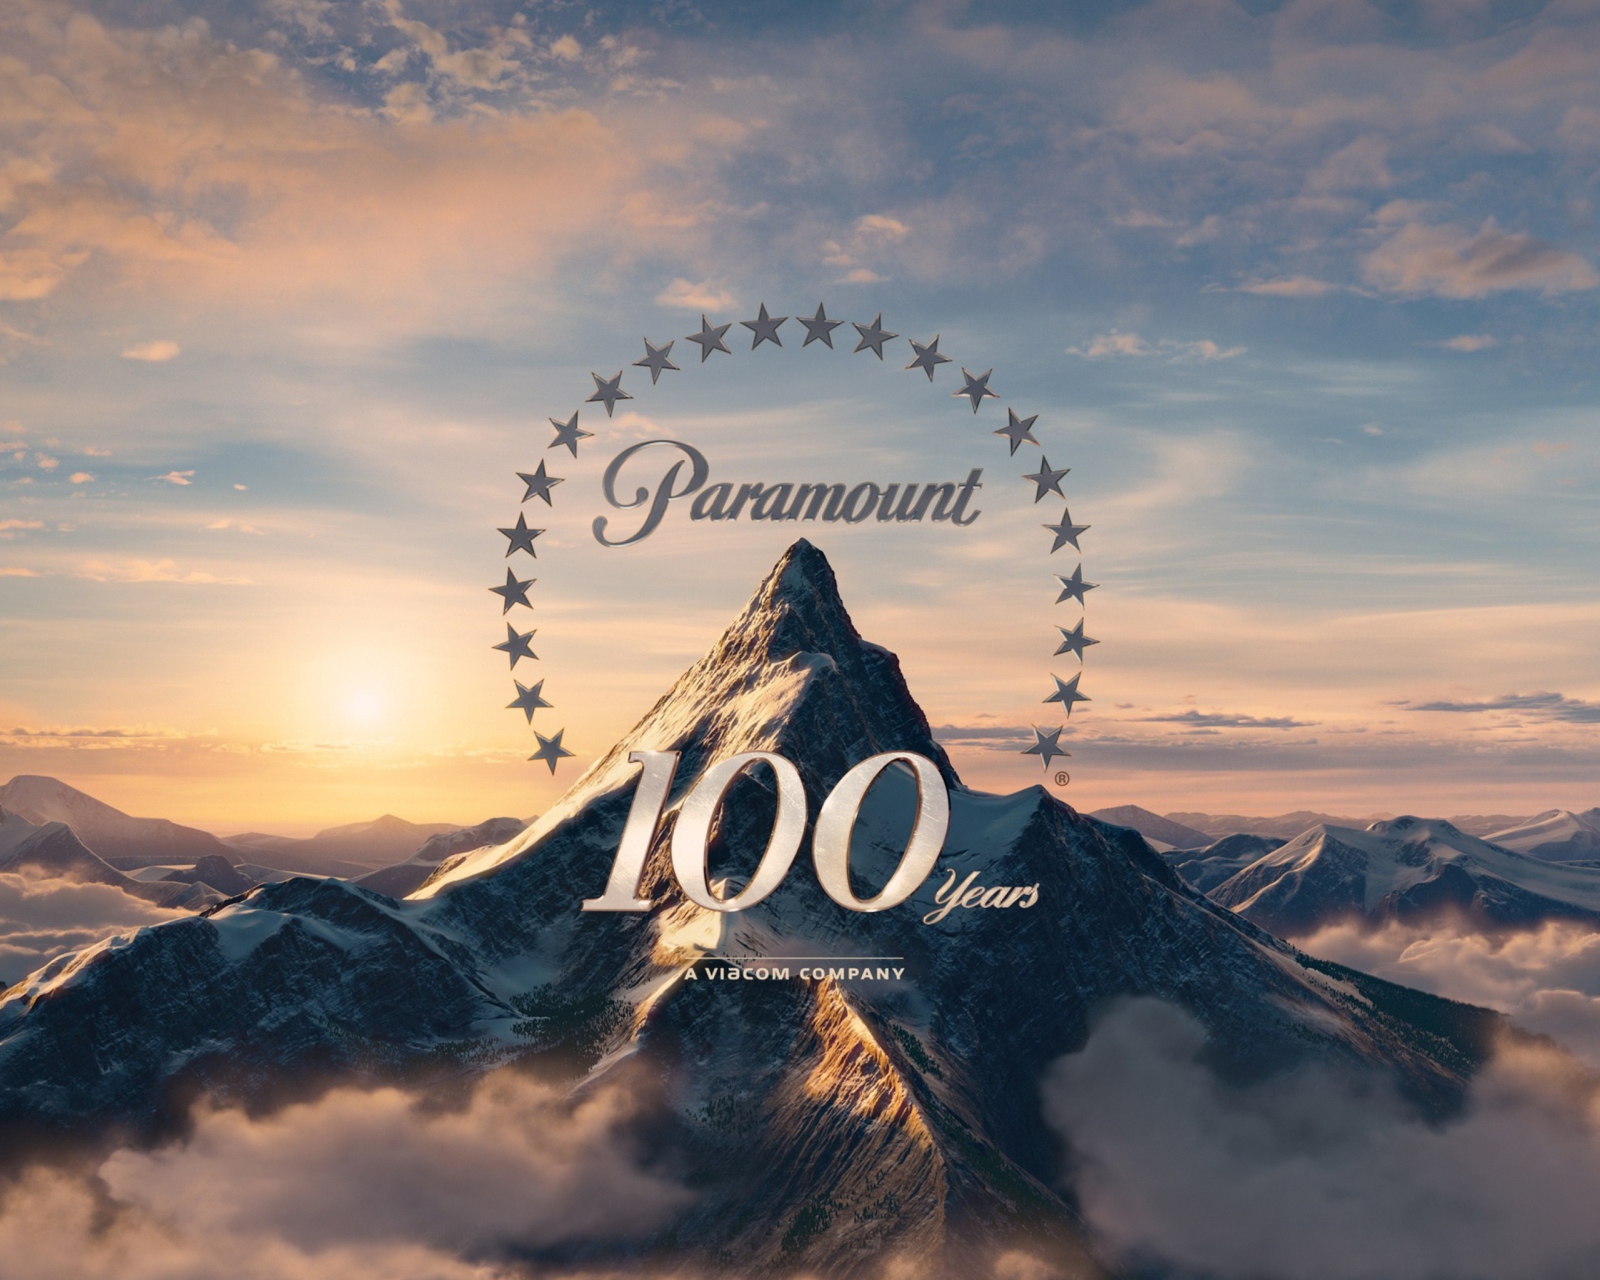 Das Paramount Pictures 100 Years Wallpaper 1600x1280